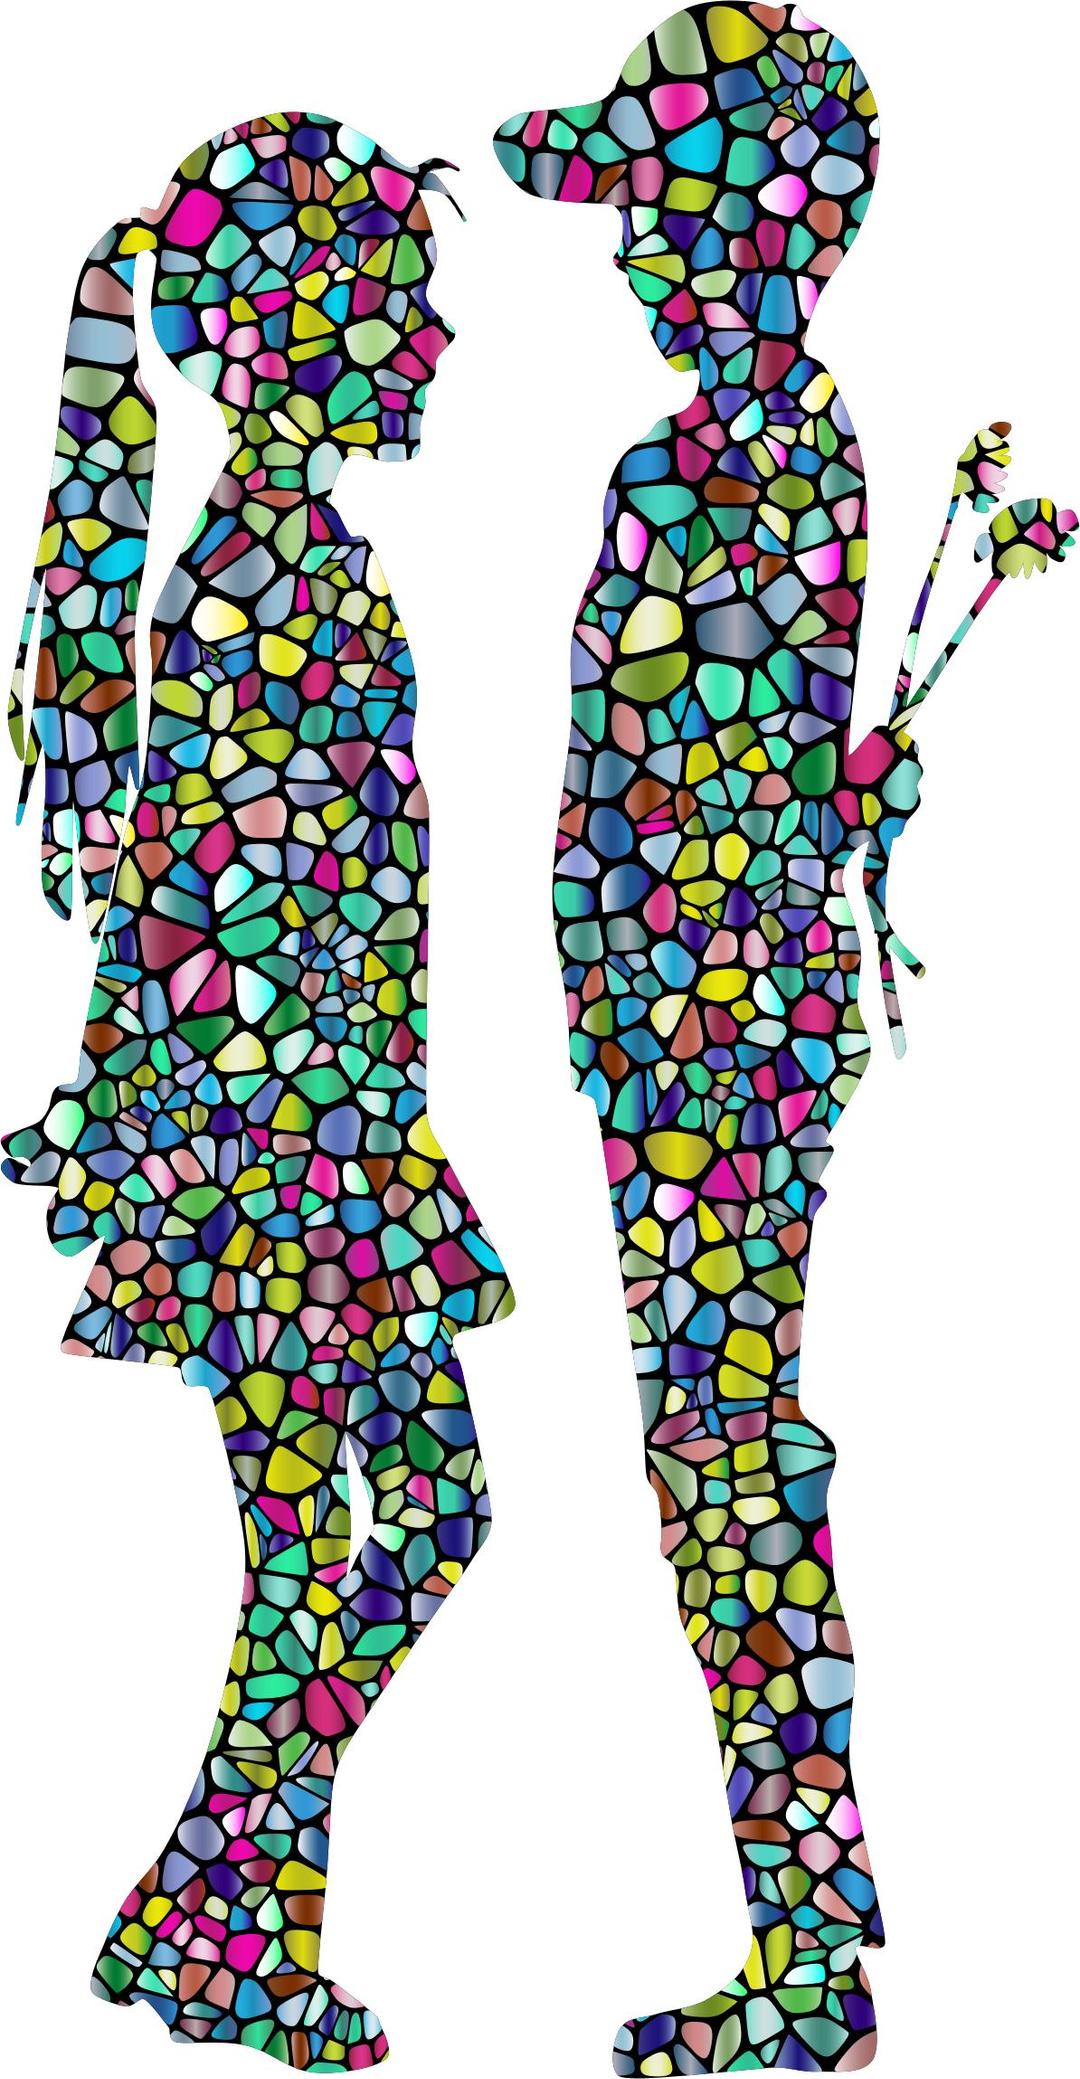 Polyprismatic Tiled Boy Giving Flowers To Girl Silhouette With Background png transparent